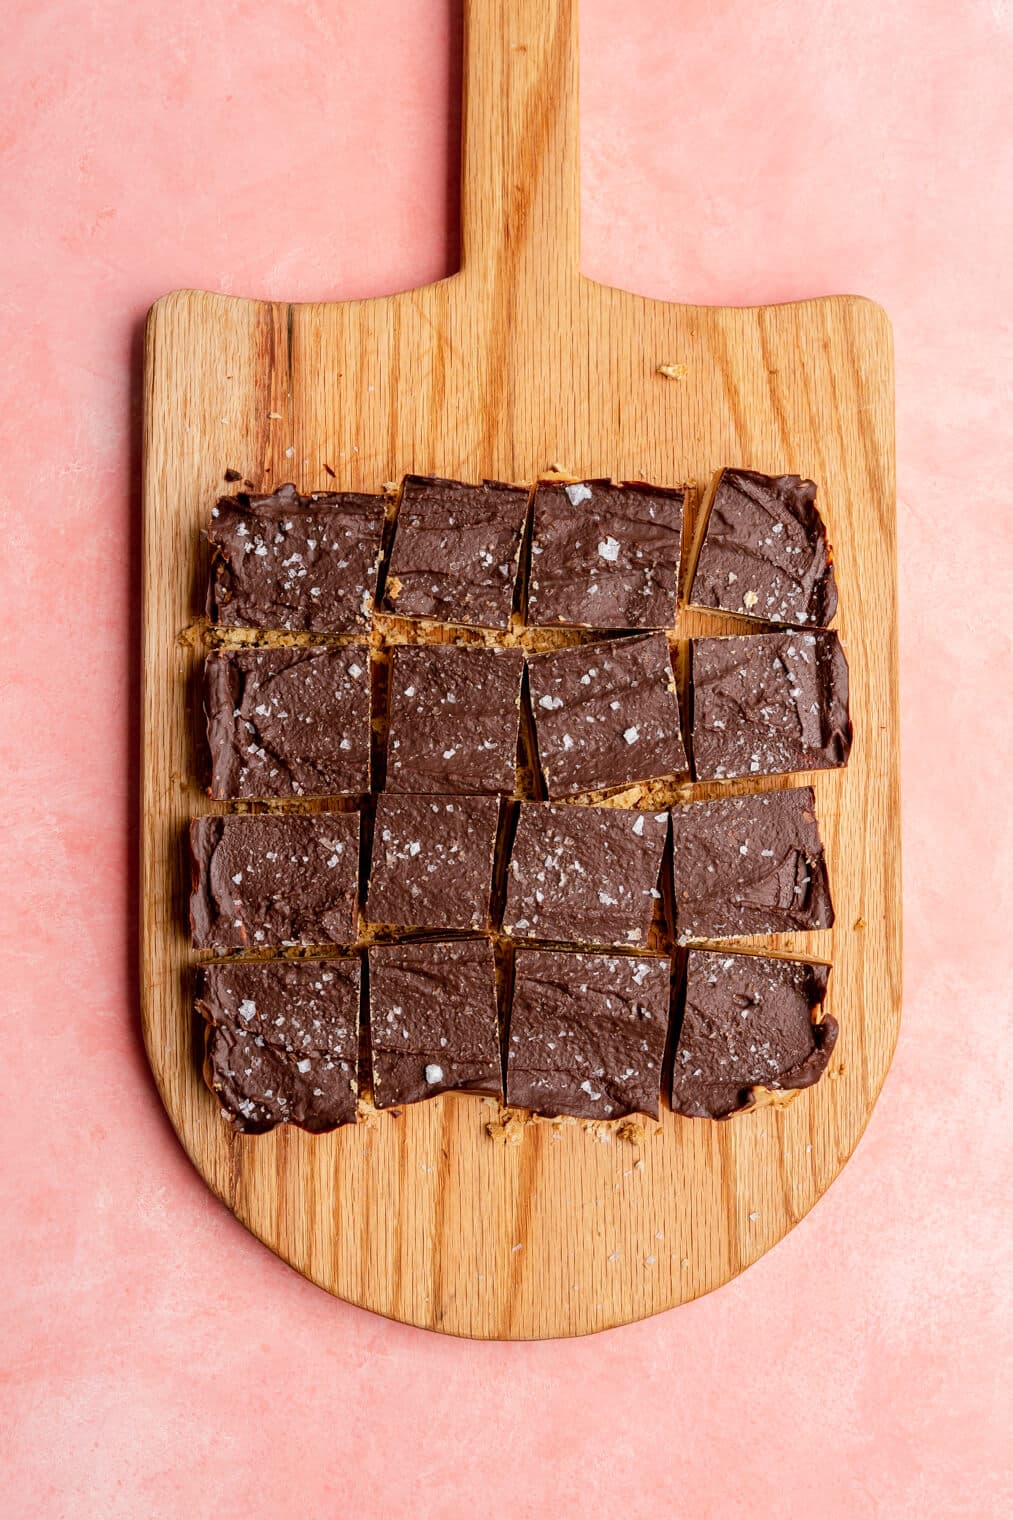 Millionaire shortbread sliced into square pieces on a wooden cutting board on a pink surface.